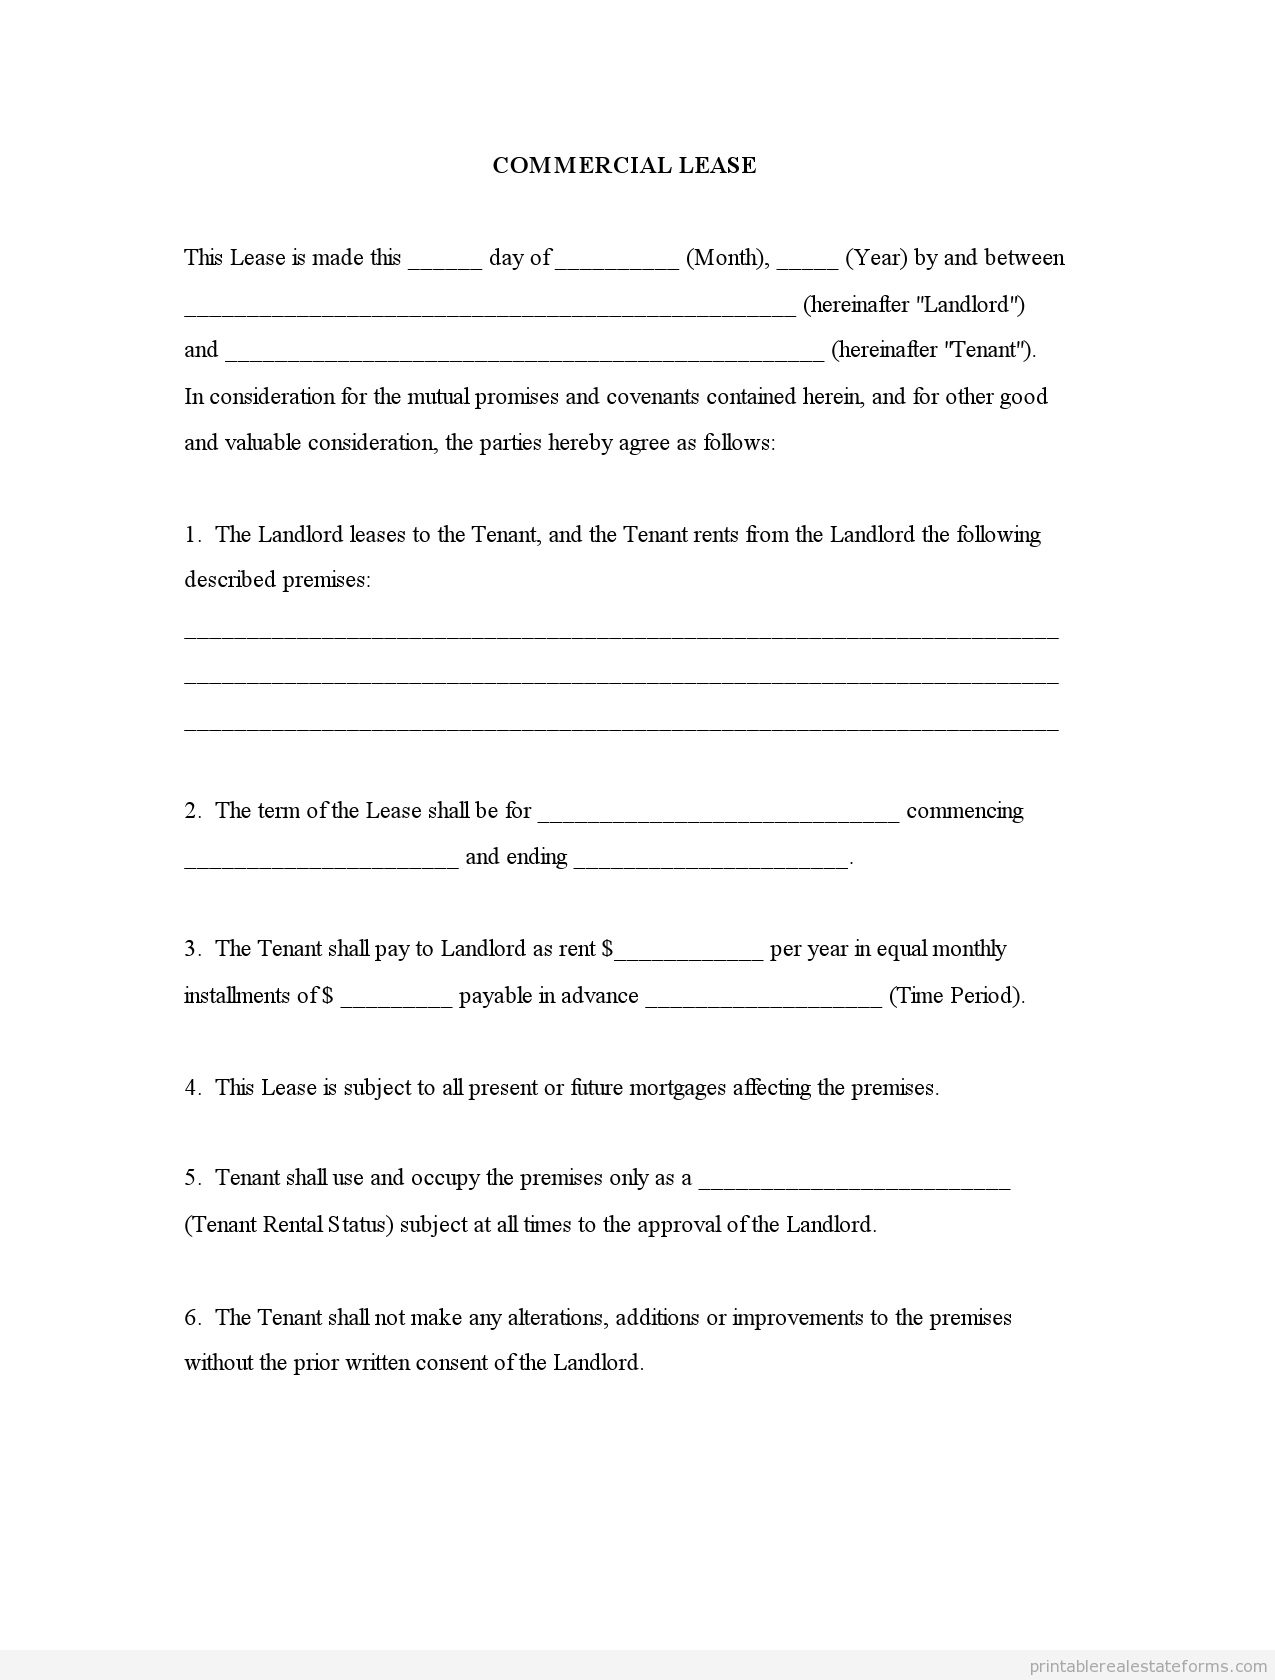 free-rental-lease-agreement-templates-residential-blank-lease